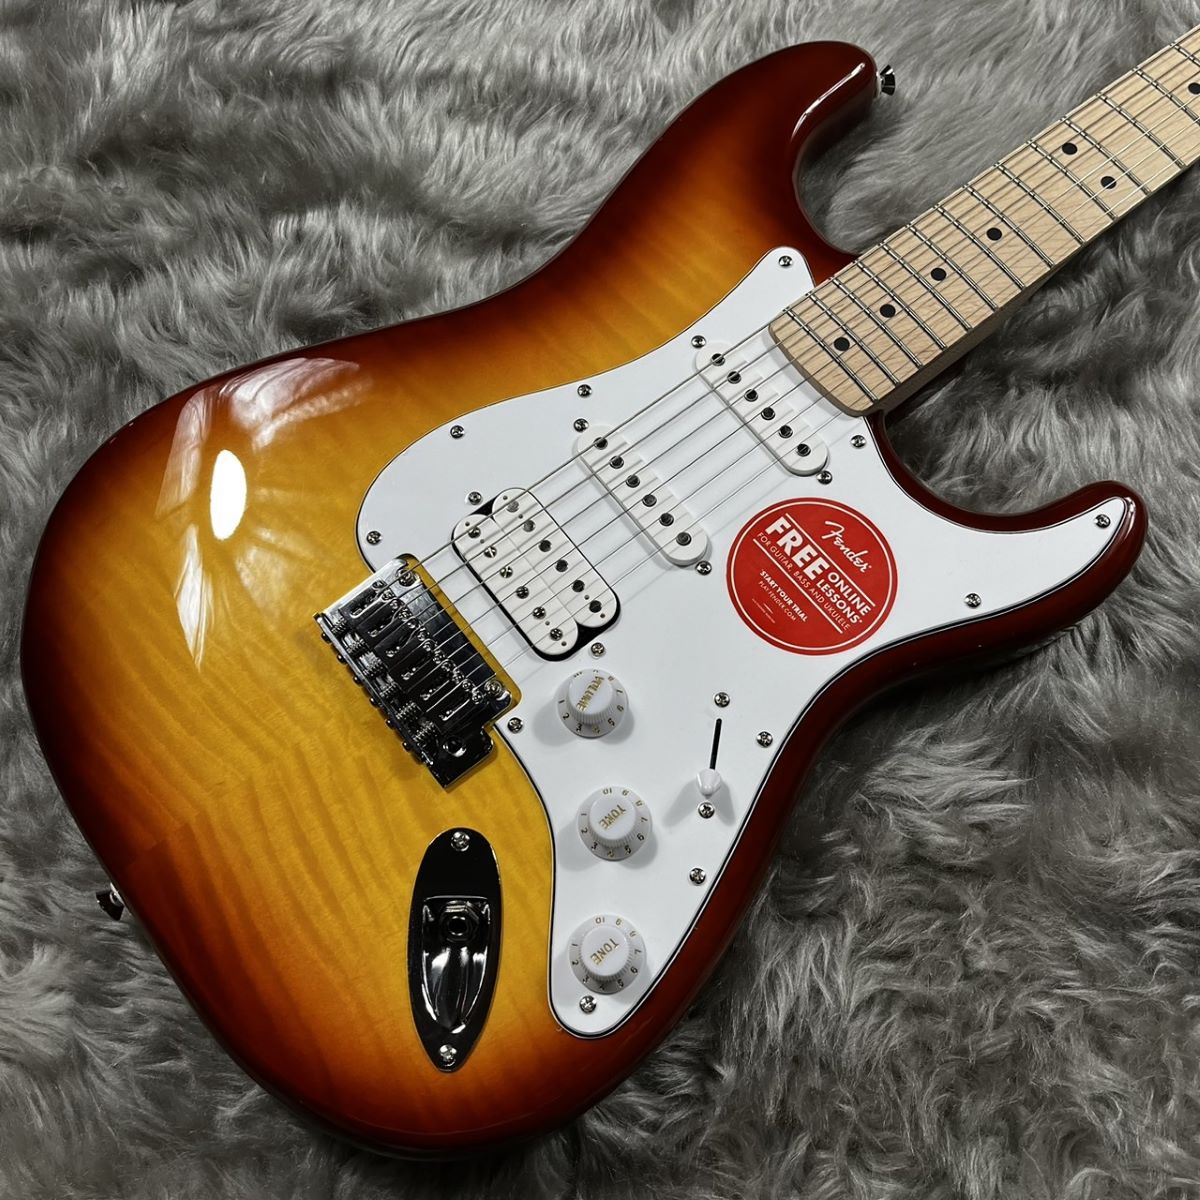 Squier by Fender Affinity Series Stratocaster FMT HSS Maple Fingerboard  White Pickguard Sienna Sunburst エレキギター ストラトキャスター スクワイヤー / スクワイア 【 ららぽーと堺店 】